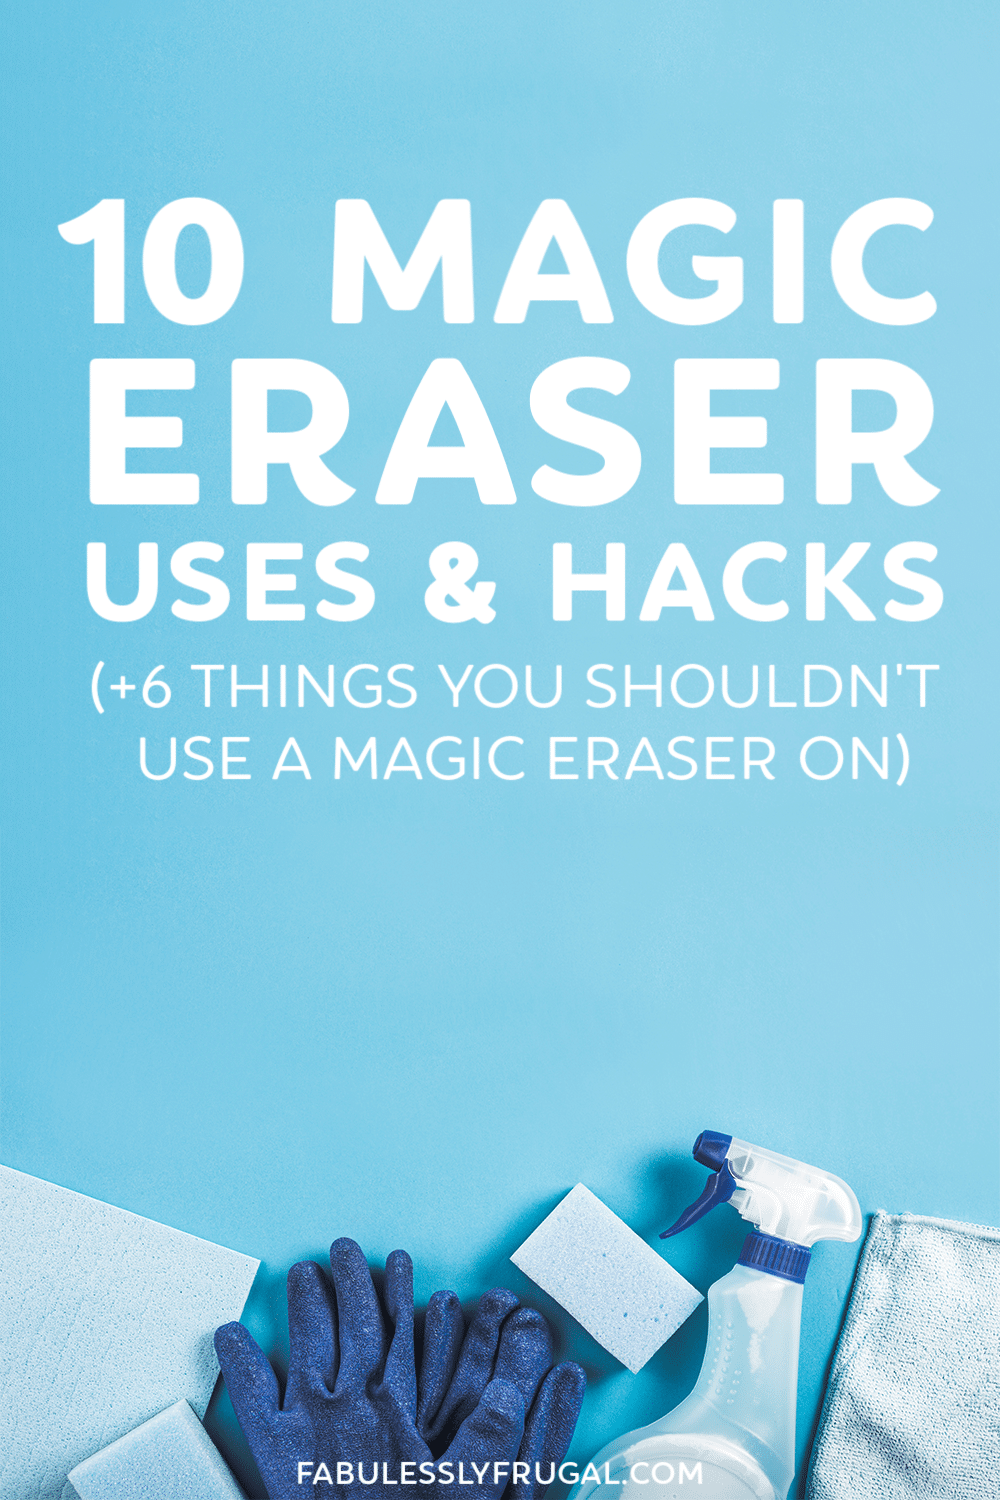 How to use magic eraser